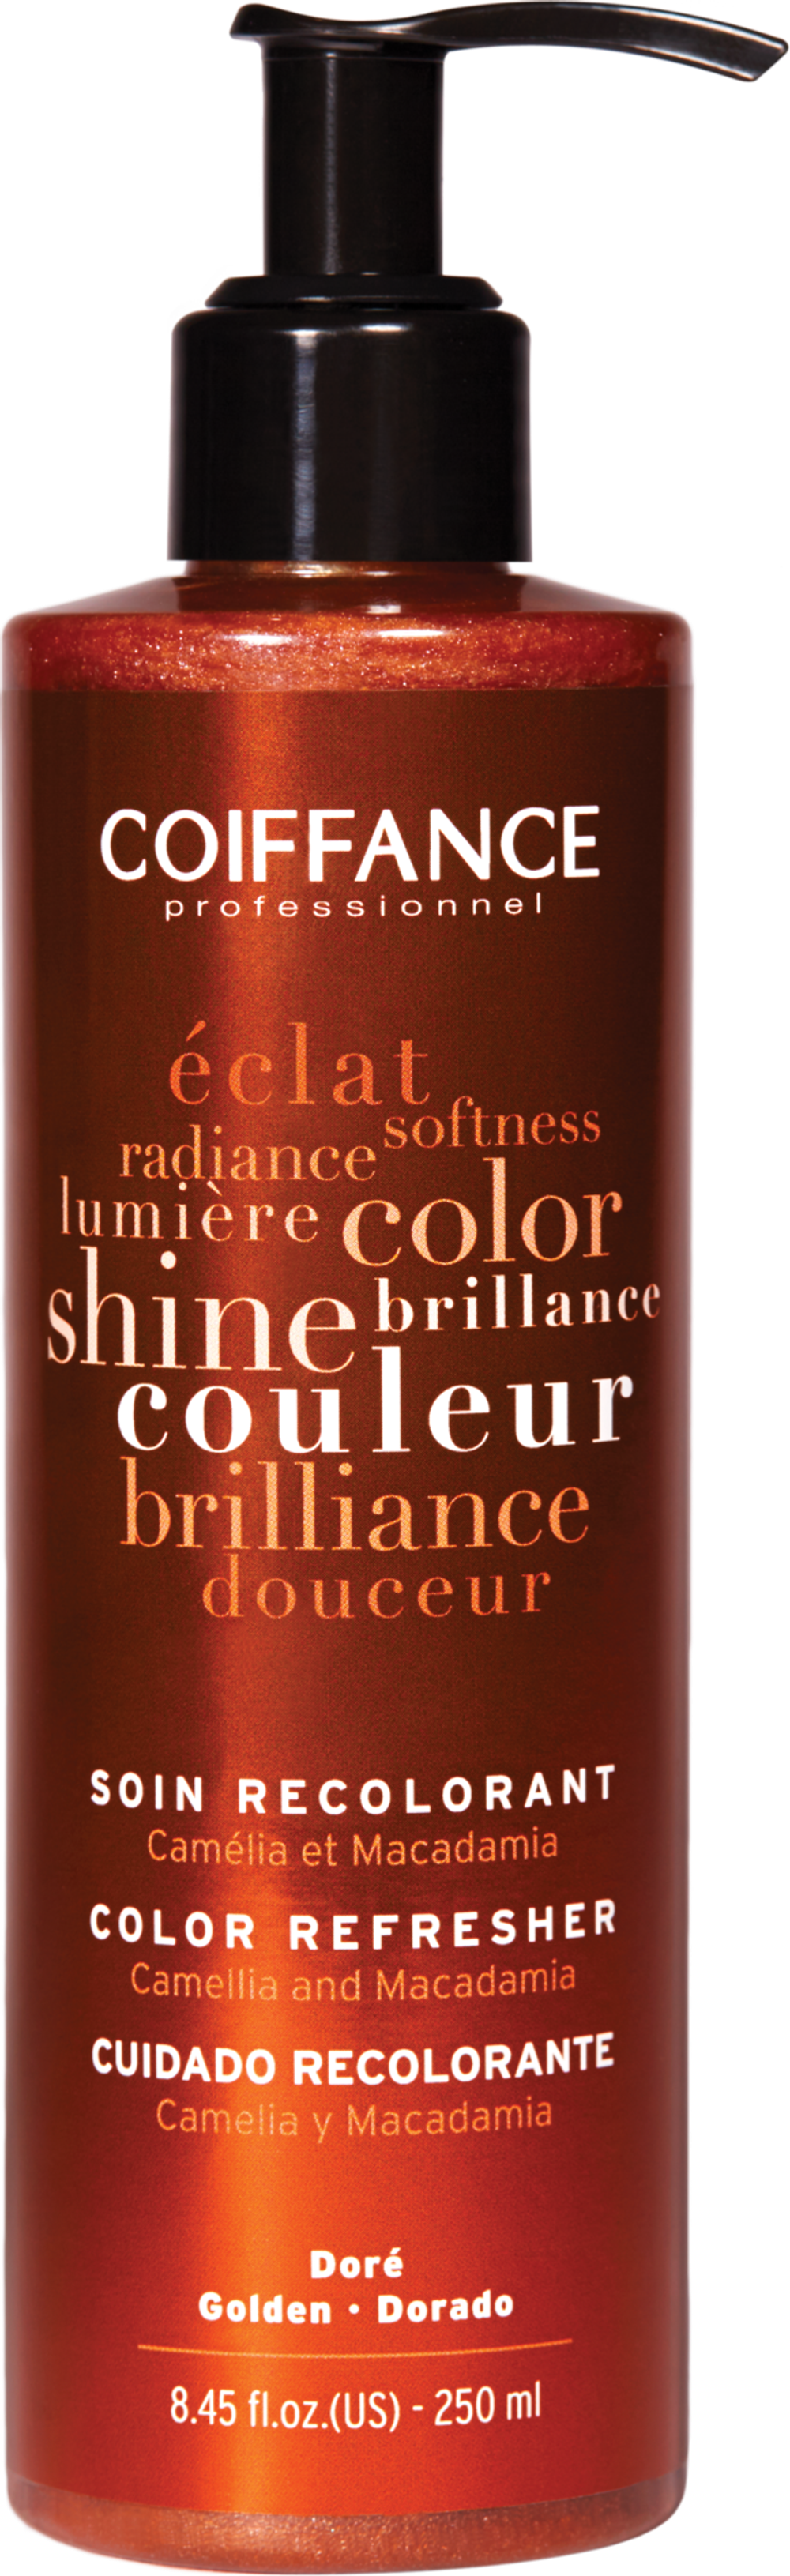 COIFFANCE COLOR BOOSTER - RECOLORING CARE GOLDEN